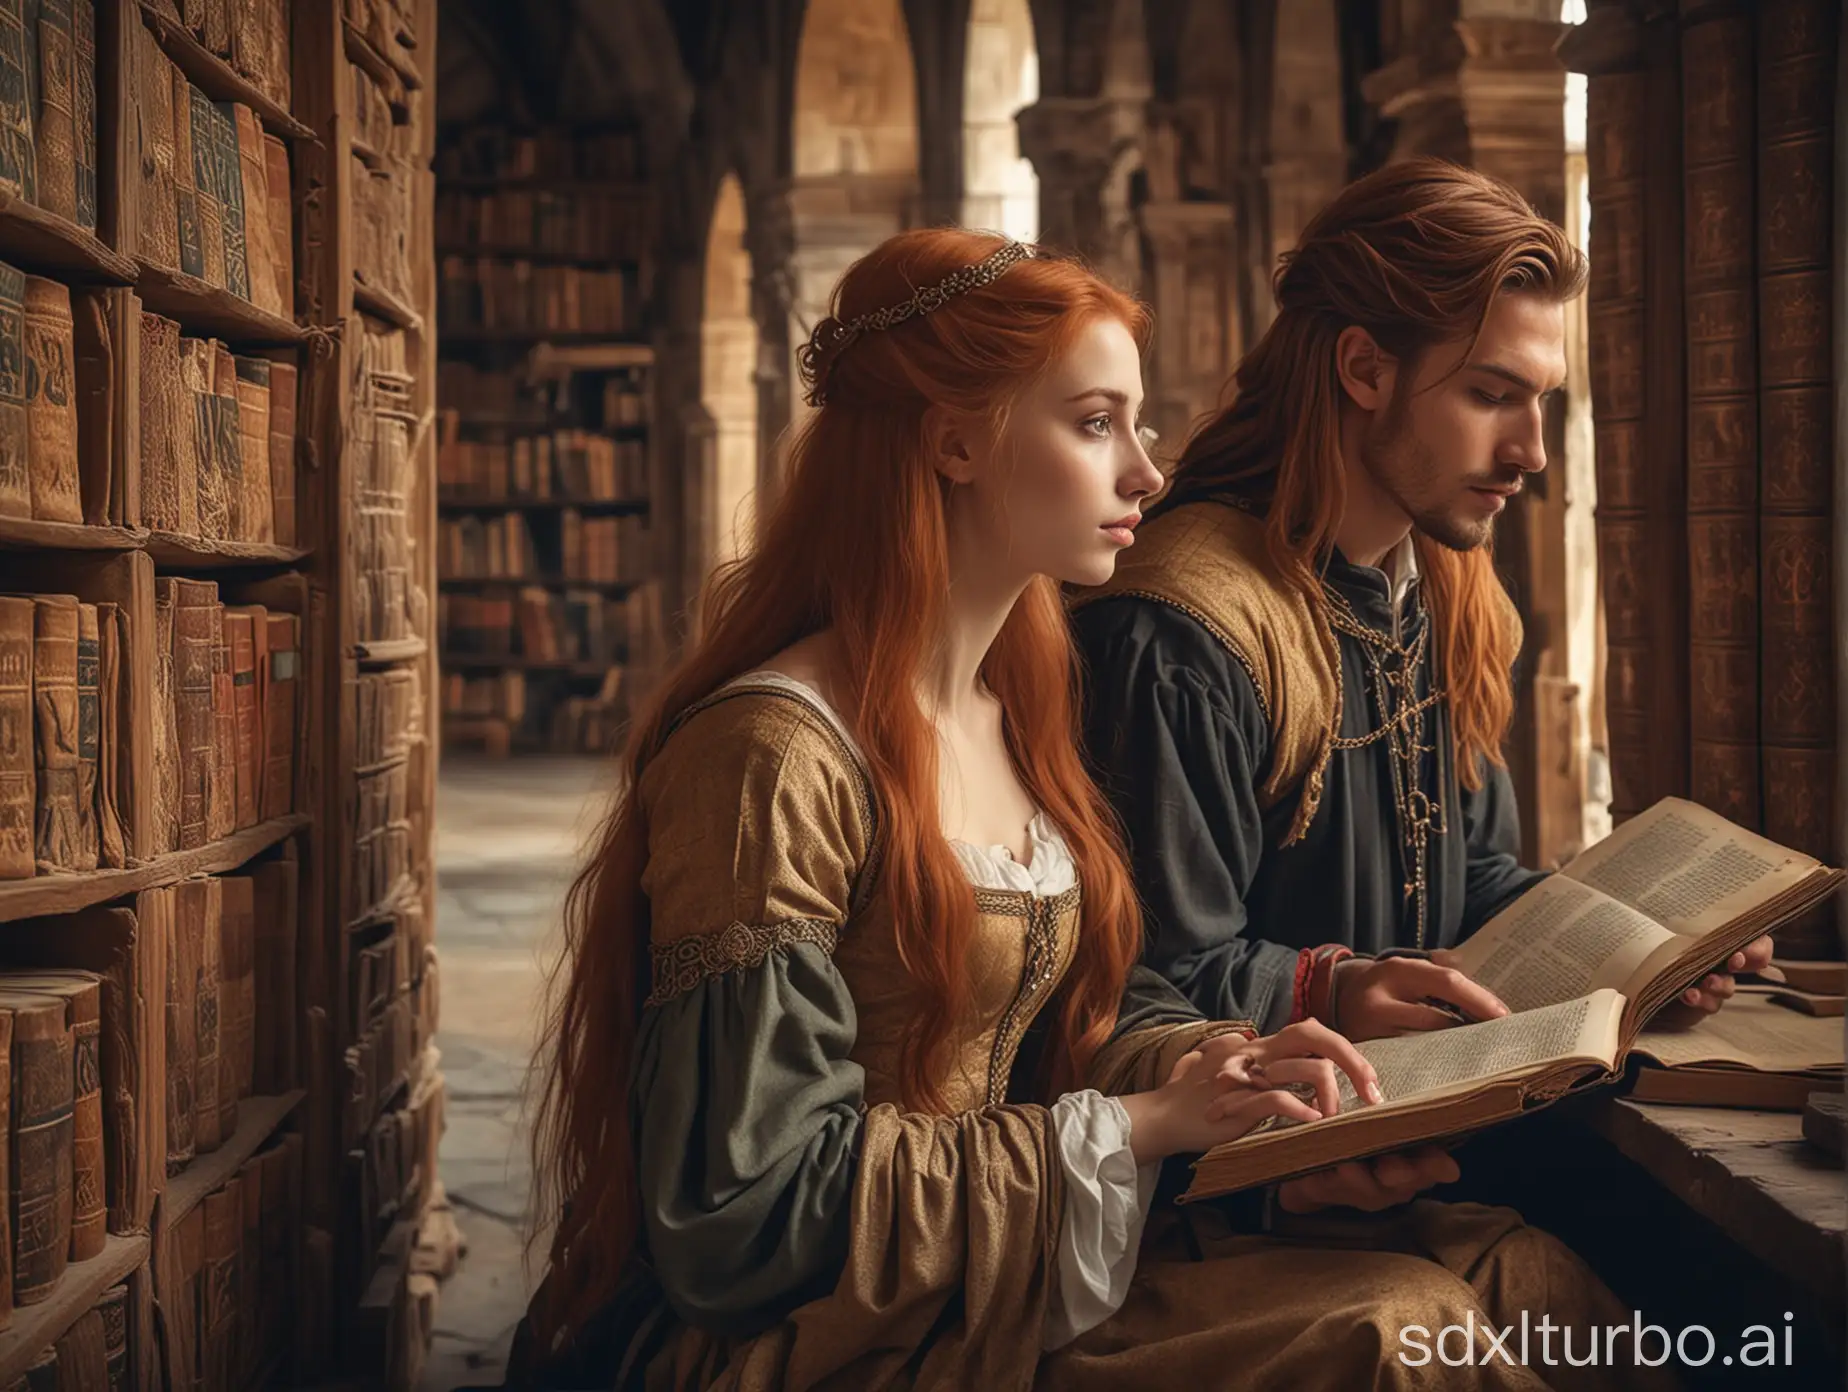 A beautiful girl with long red hair in a (((medieval)))) dress and a handsome guy with not long light brown hair in (((medieval ))) nice clothes, sit, engrossed in reading an old ancient folio, in an ancient library amidst many ancient books